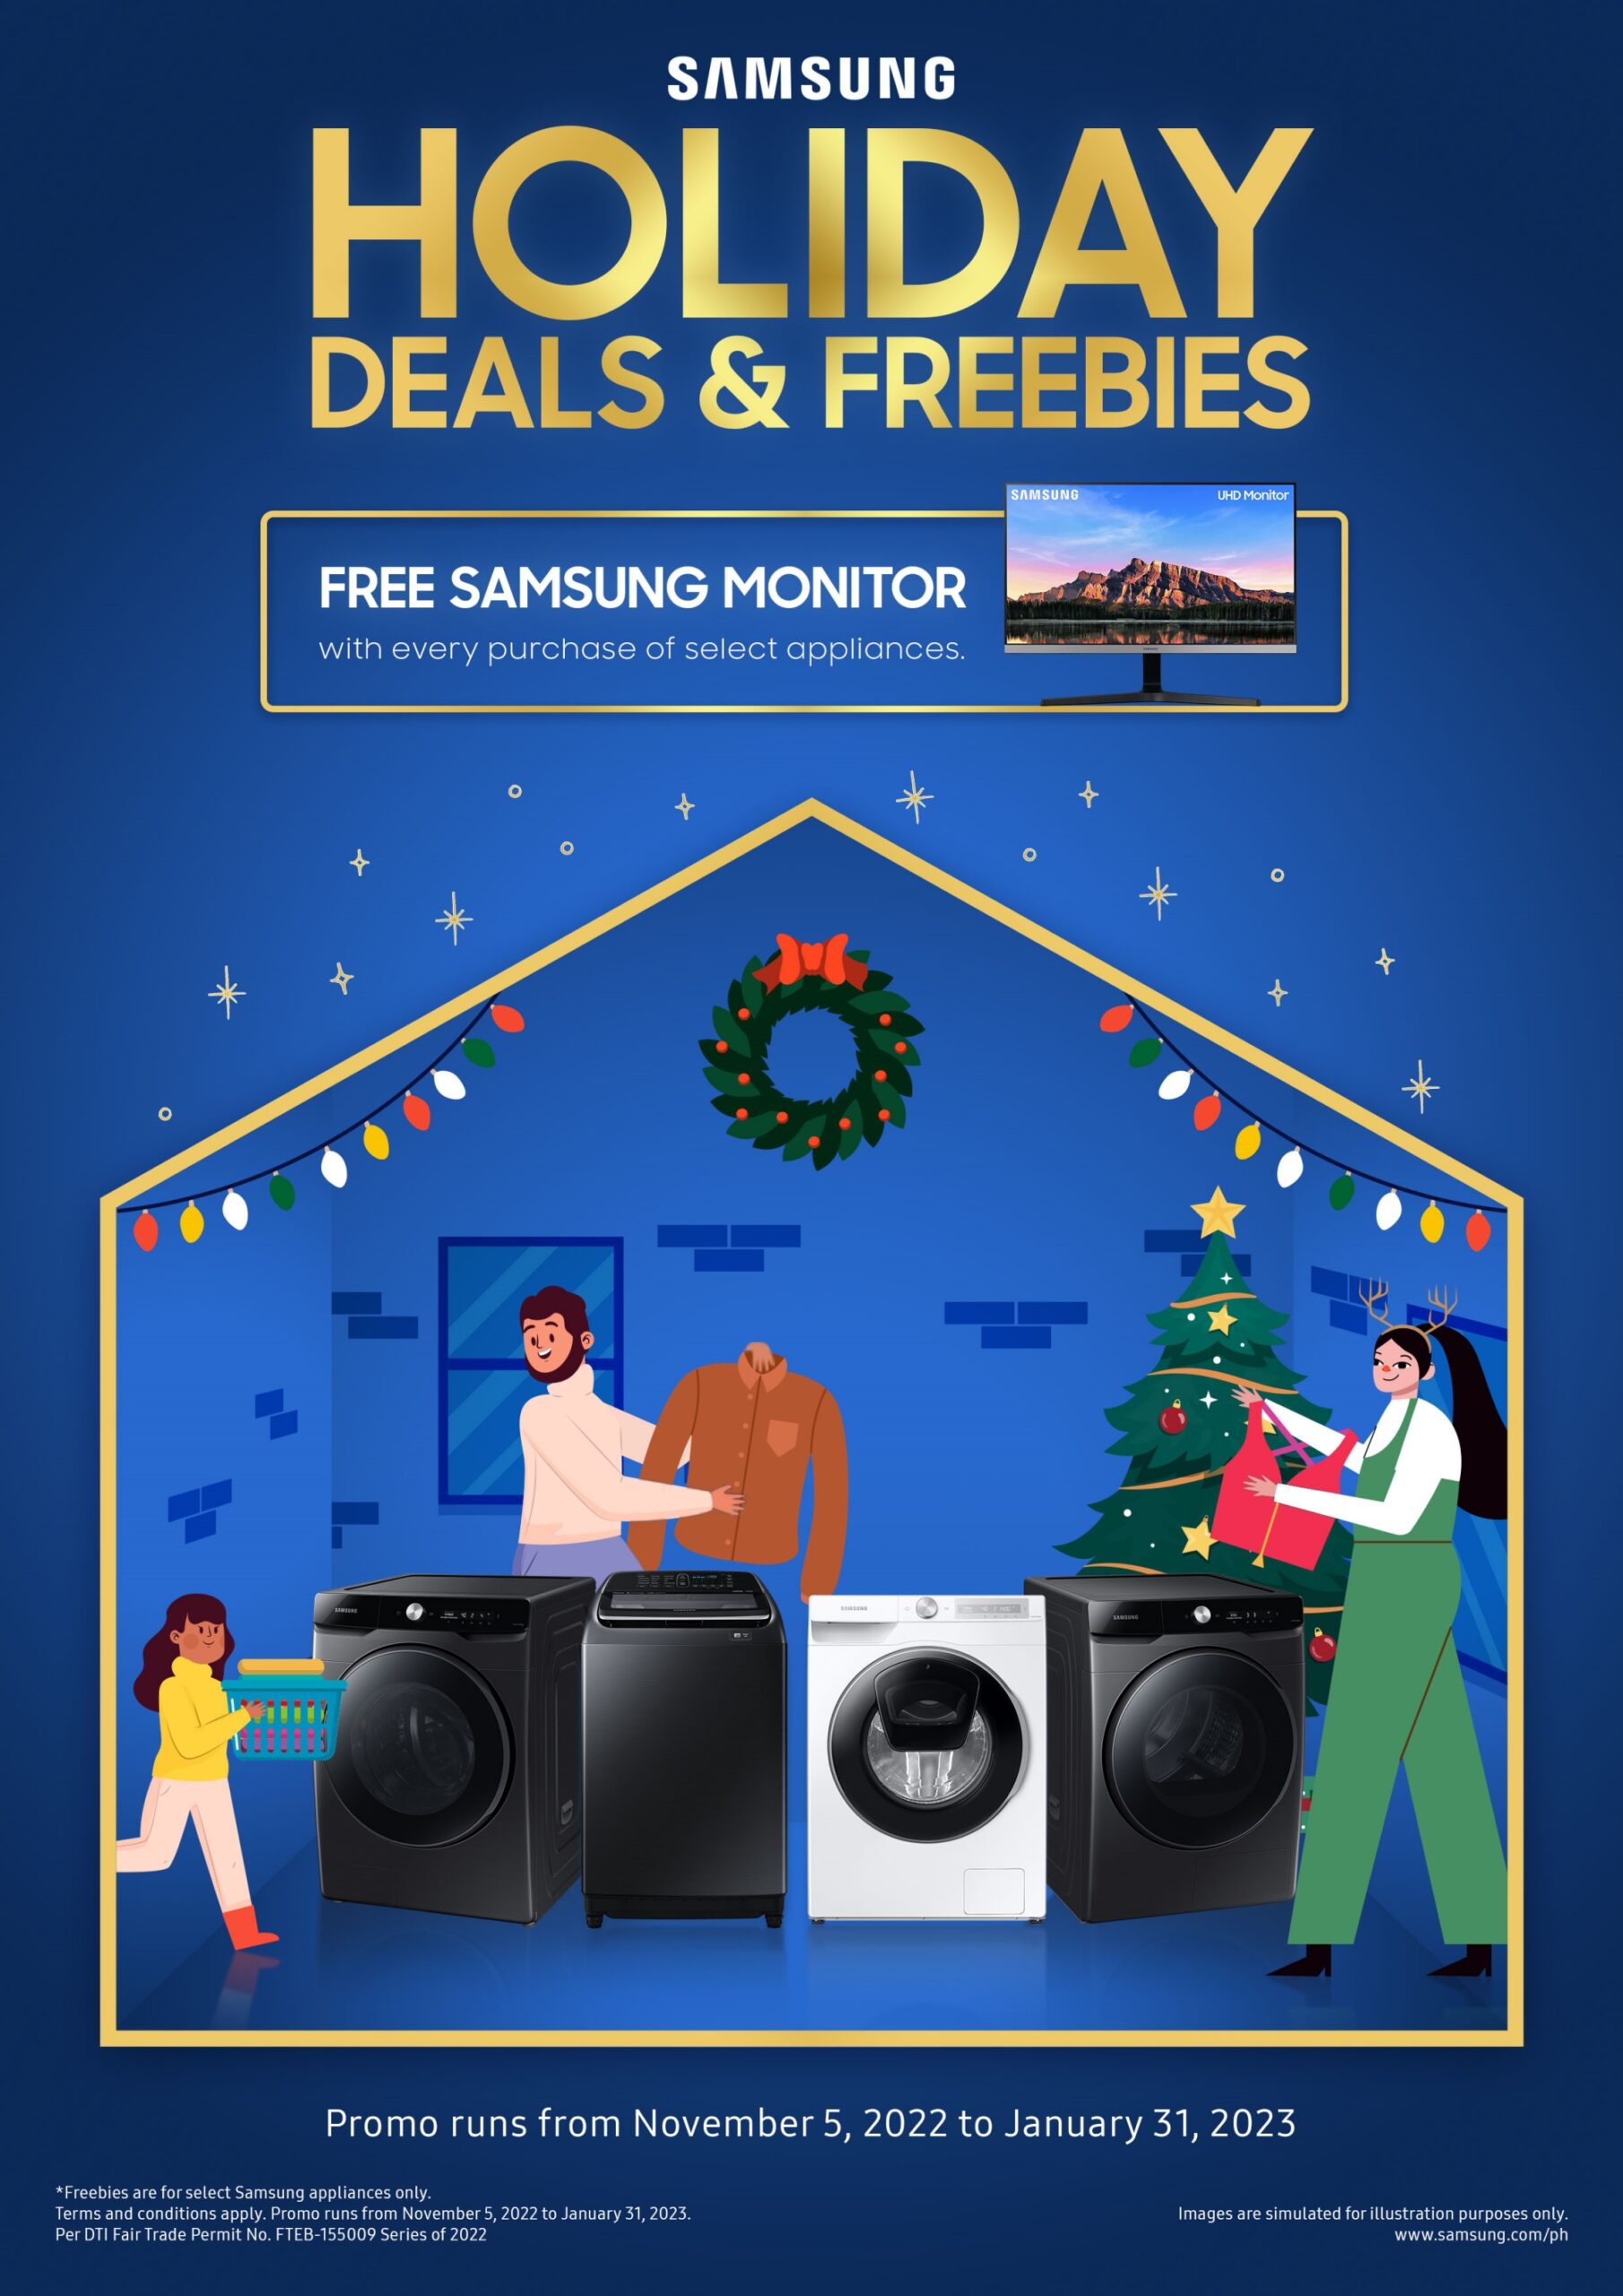 http://www.teampcheng.com/blog/wp-content/uploads/2022/12/All-the-holiday-deals-and-freebies-from-Samsung-Digital-Appliances-this-Christmas_4-scaled.jpg